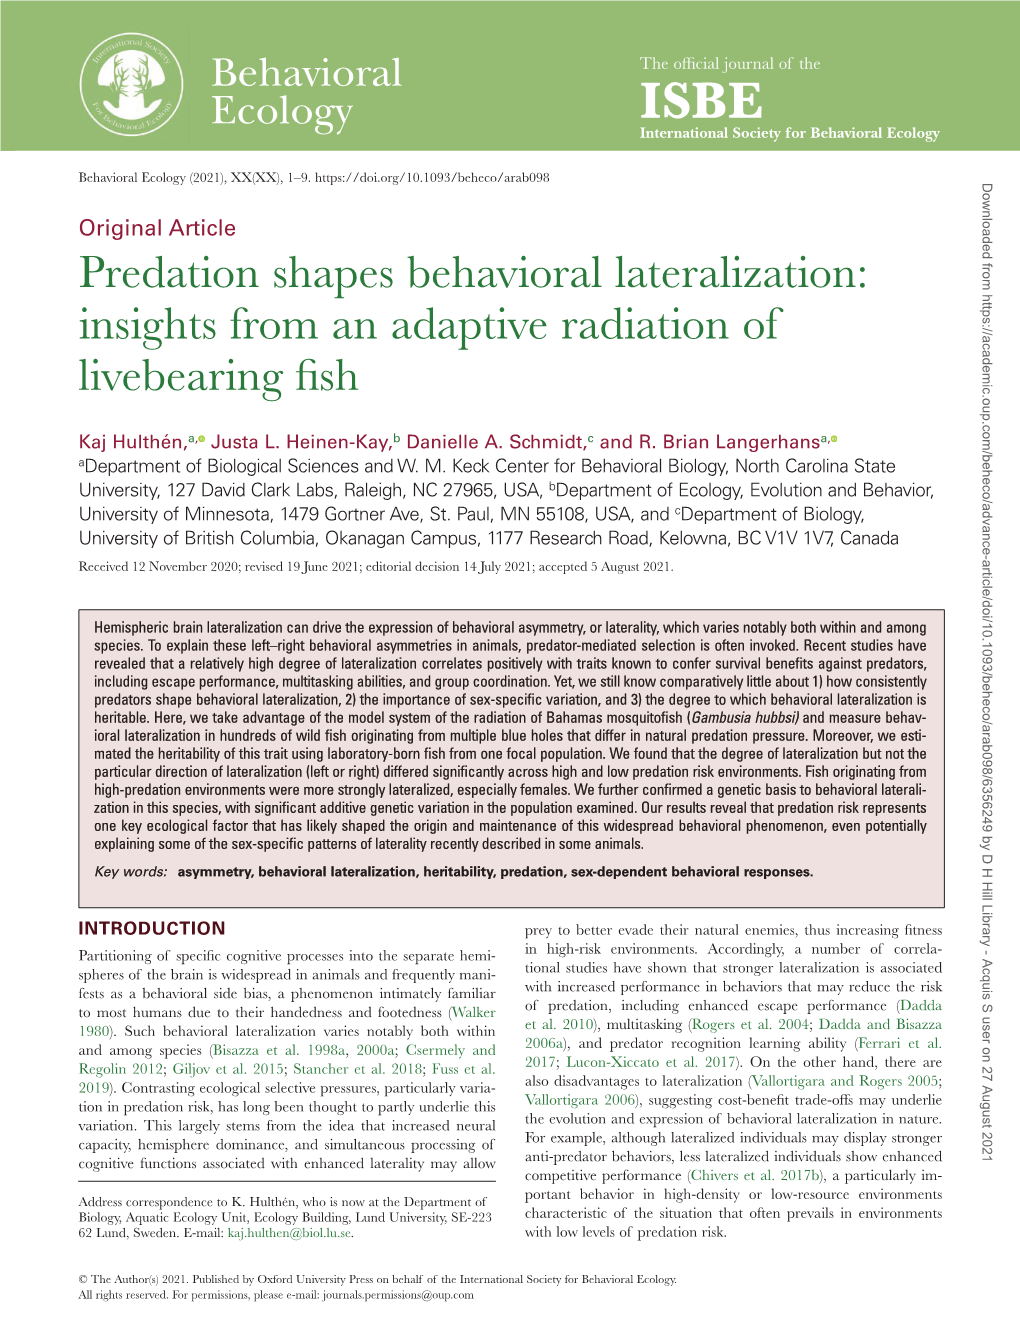 Predation Shapes Behavioral Lateralization: Insights from an Adaptive Radiation of Livebearing Fish